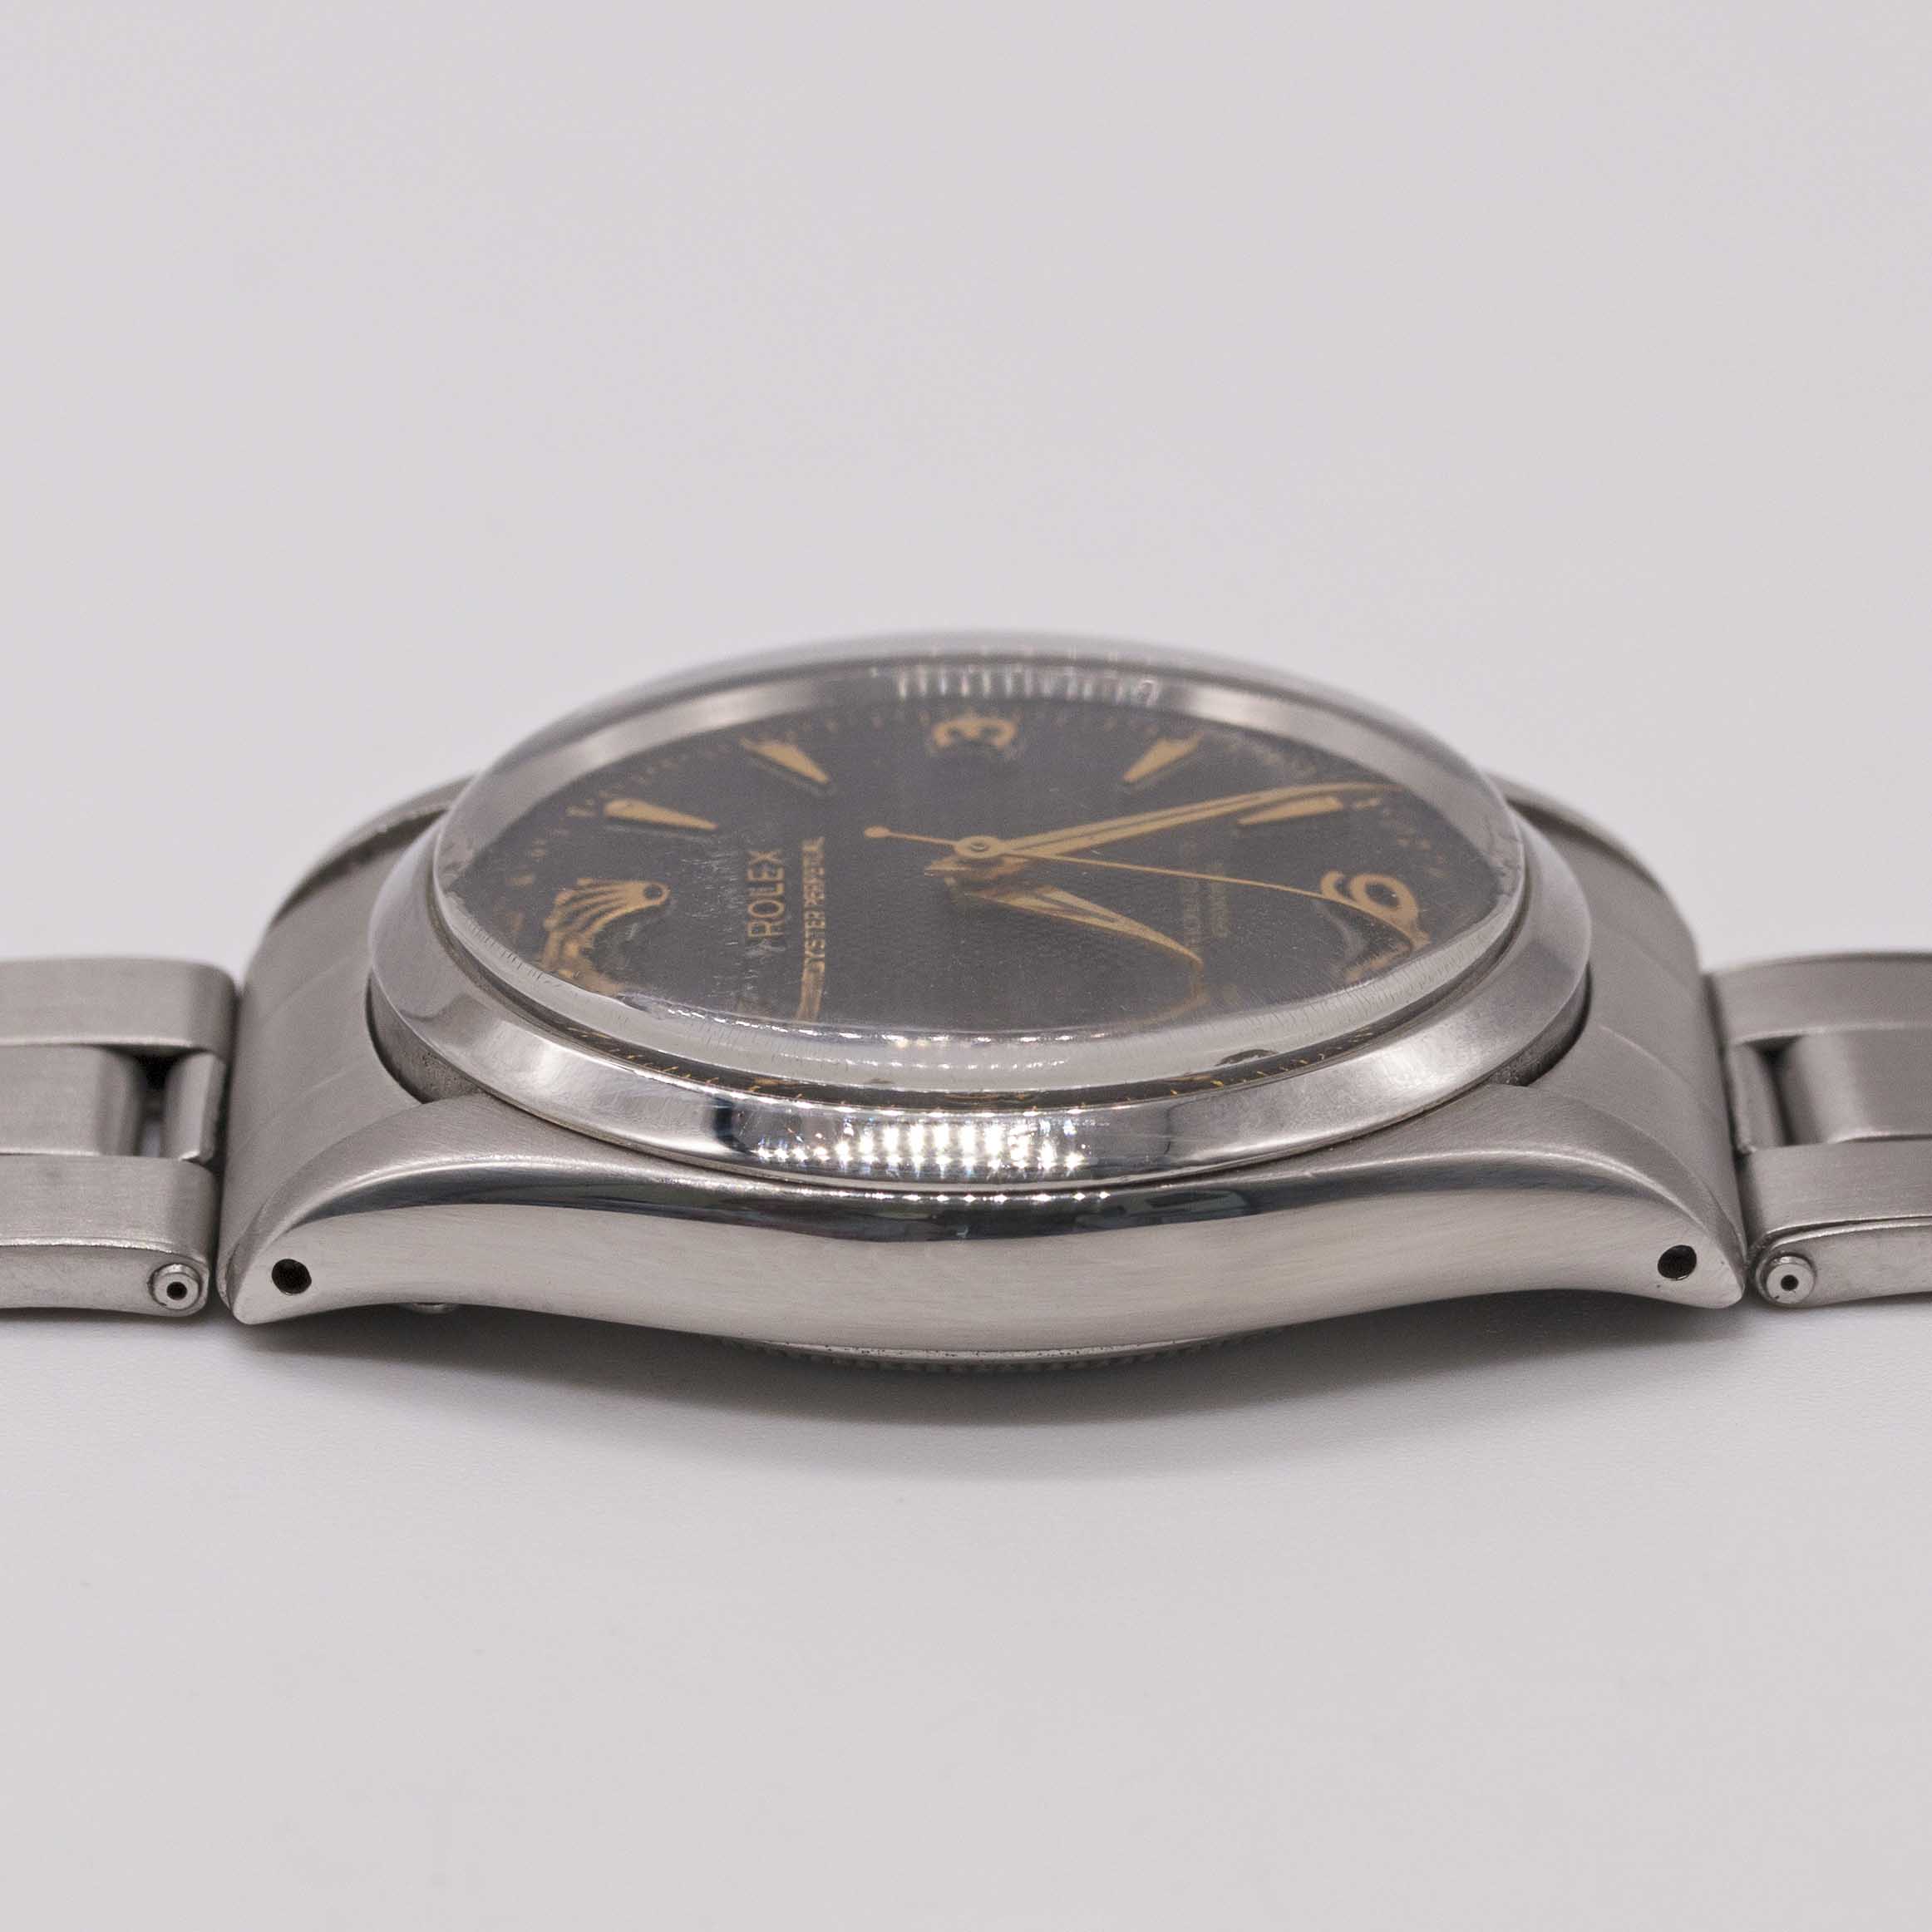 A RARE GENTLEMAN'S STAINLESS STEEL ROLEX OYSTER PERPETUAL BRACELET WATCH CIRCA 1956, REF. 6564 - Image 11 of 12